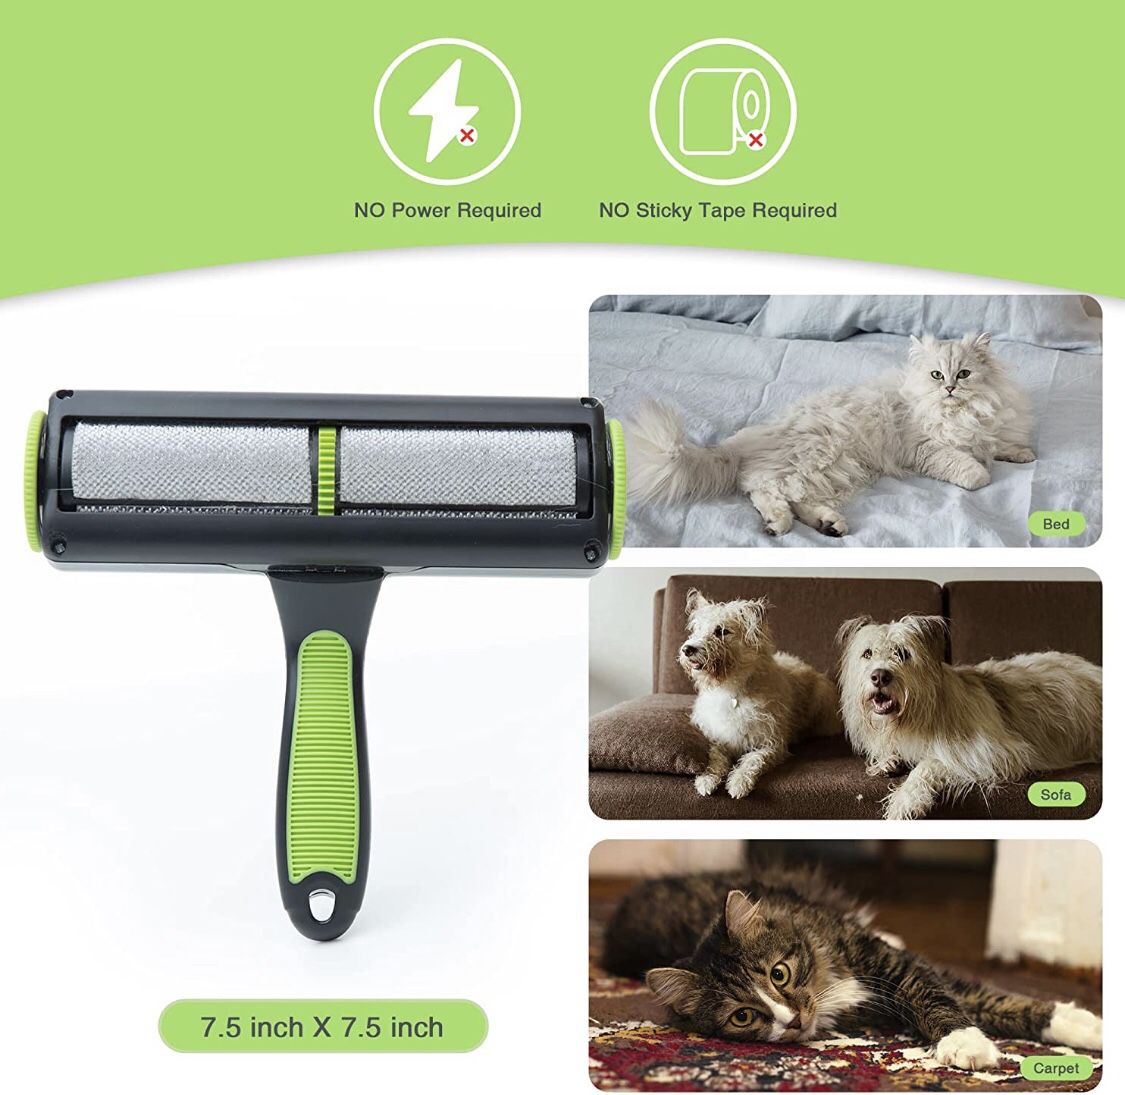 Pet Hair Remover for Couch, Reusable Dog Cat Hair Remover Roller Brush for Clothes, Bedding, Non-Slip Handle Grip for Comfort Remove Experience